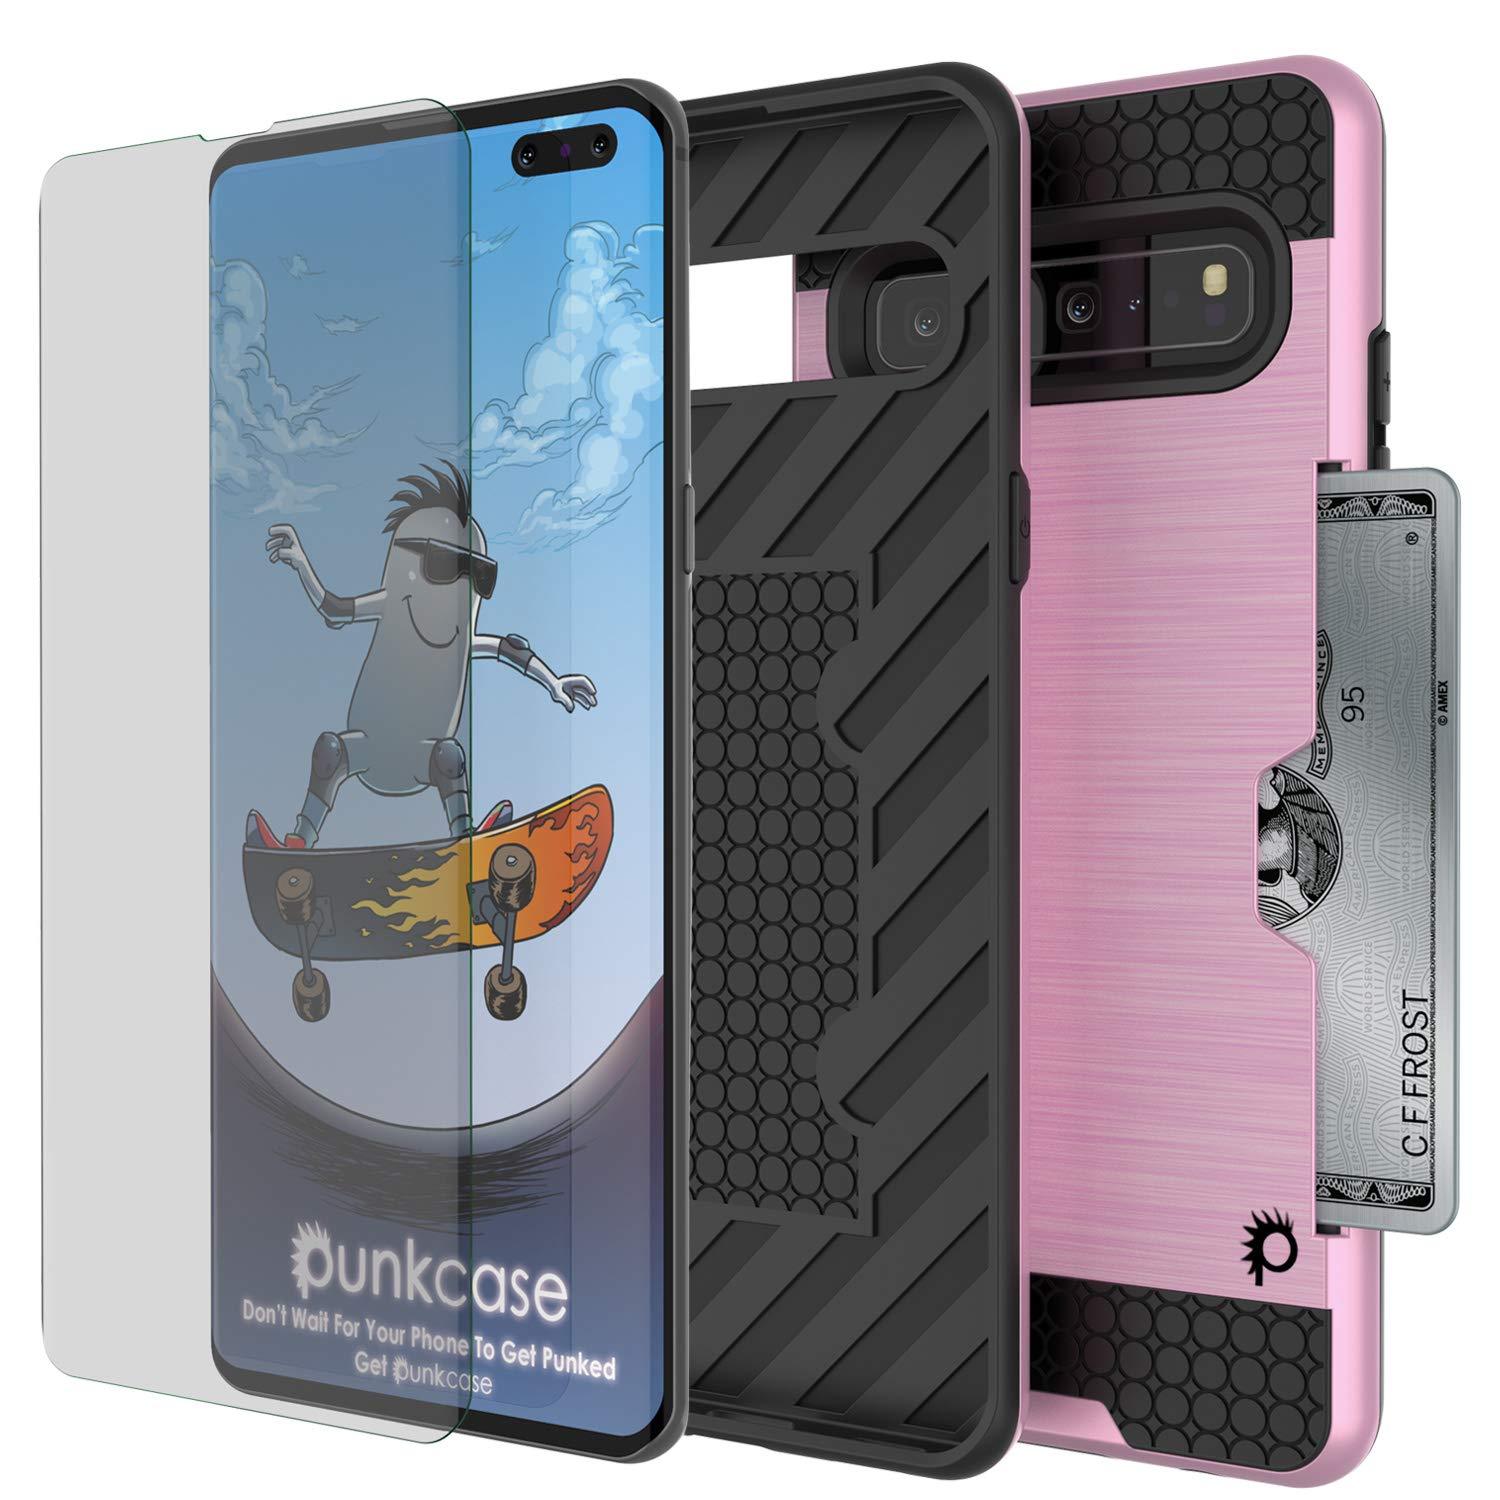 Galaxy S10 5G  Case, PUNKcase [SLOT Series] [Slim Fit] Dual-Layer Armor Cover w/Integrated Anti-Shock System, Credit Card Slot [Pink]